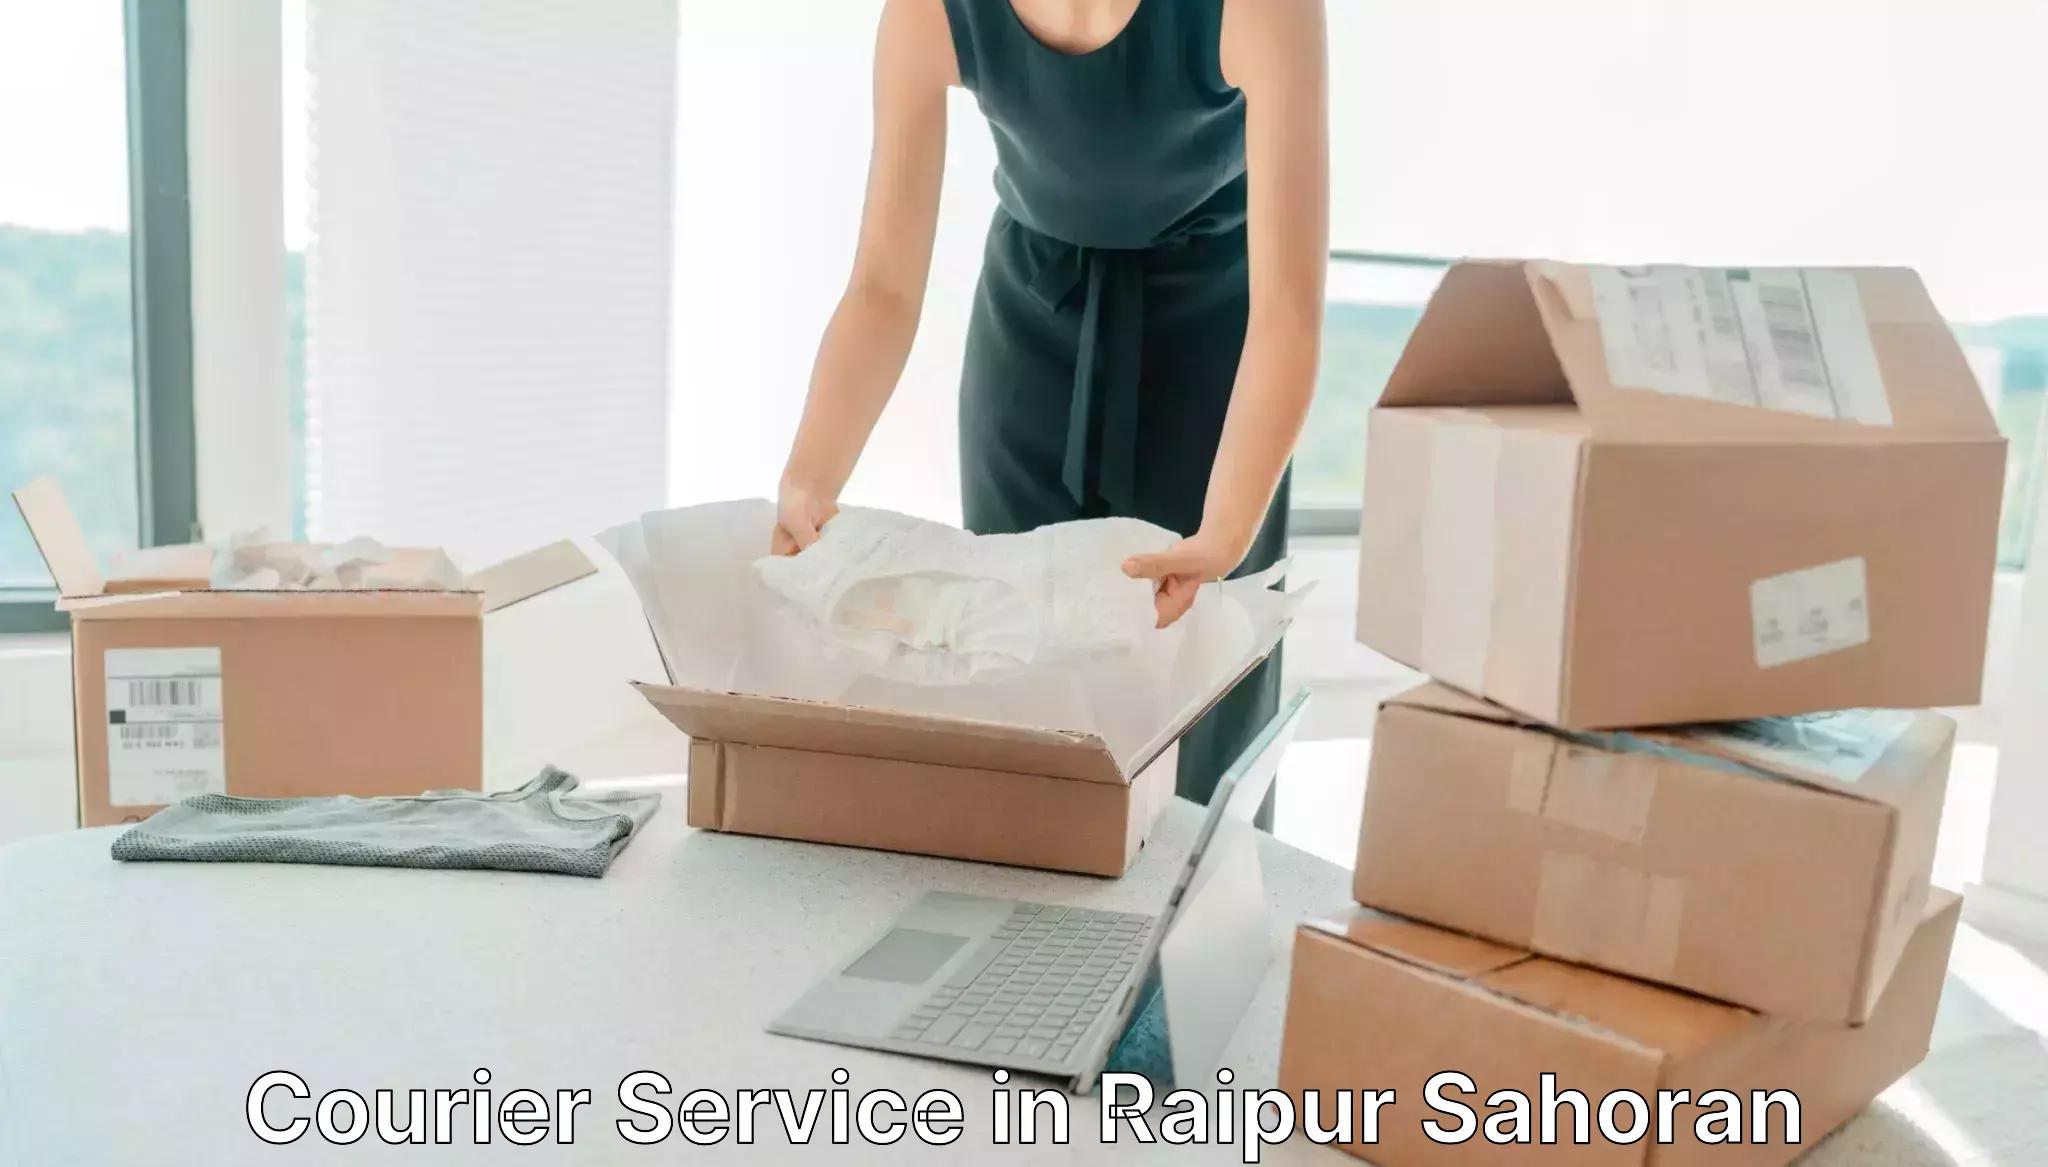 State-of-the-art courier technology in Raipur Sahoran